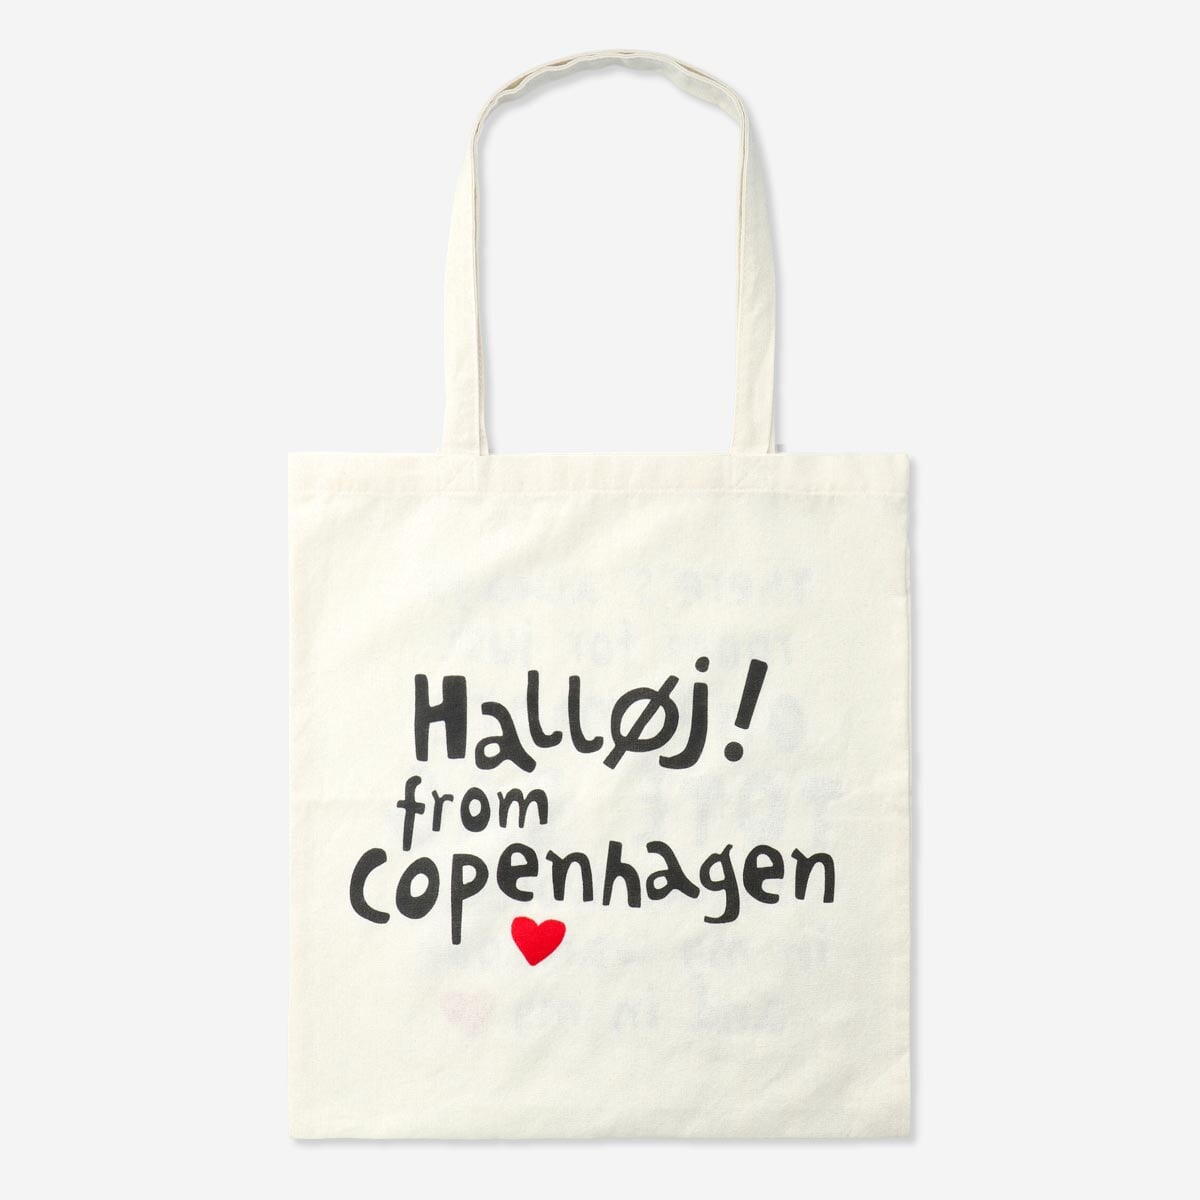 Gift tote bag with the new opening of Flying Tiger Copenhagen